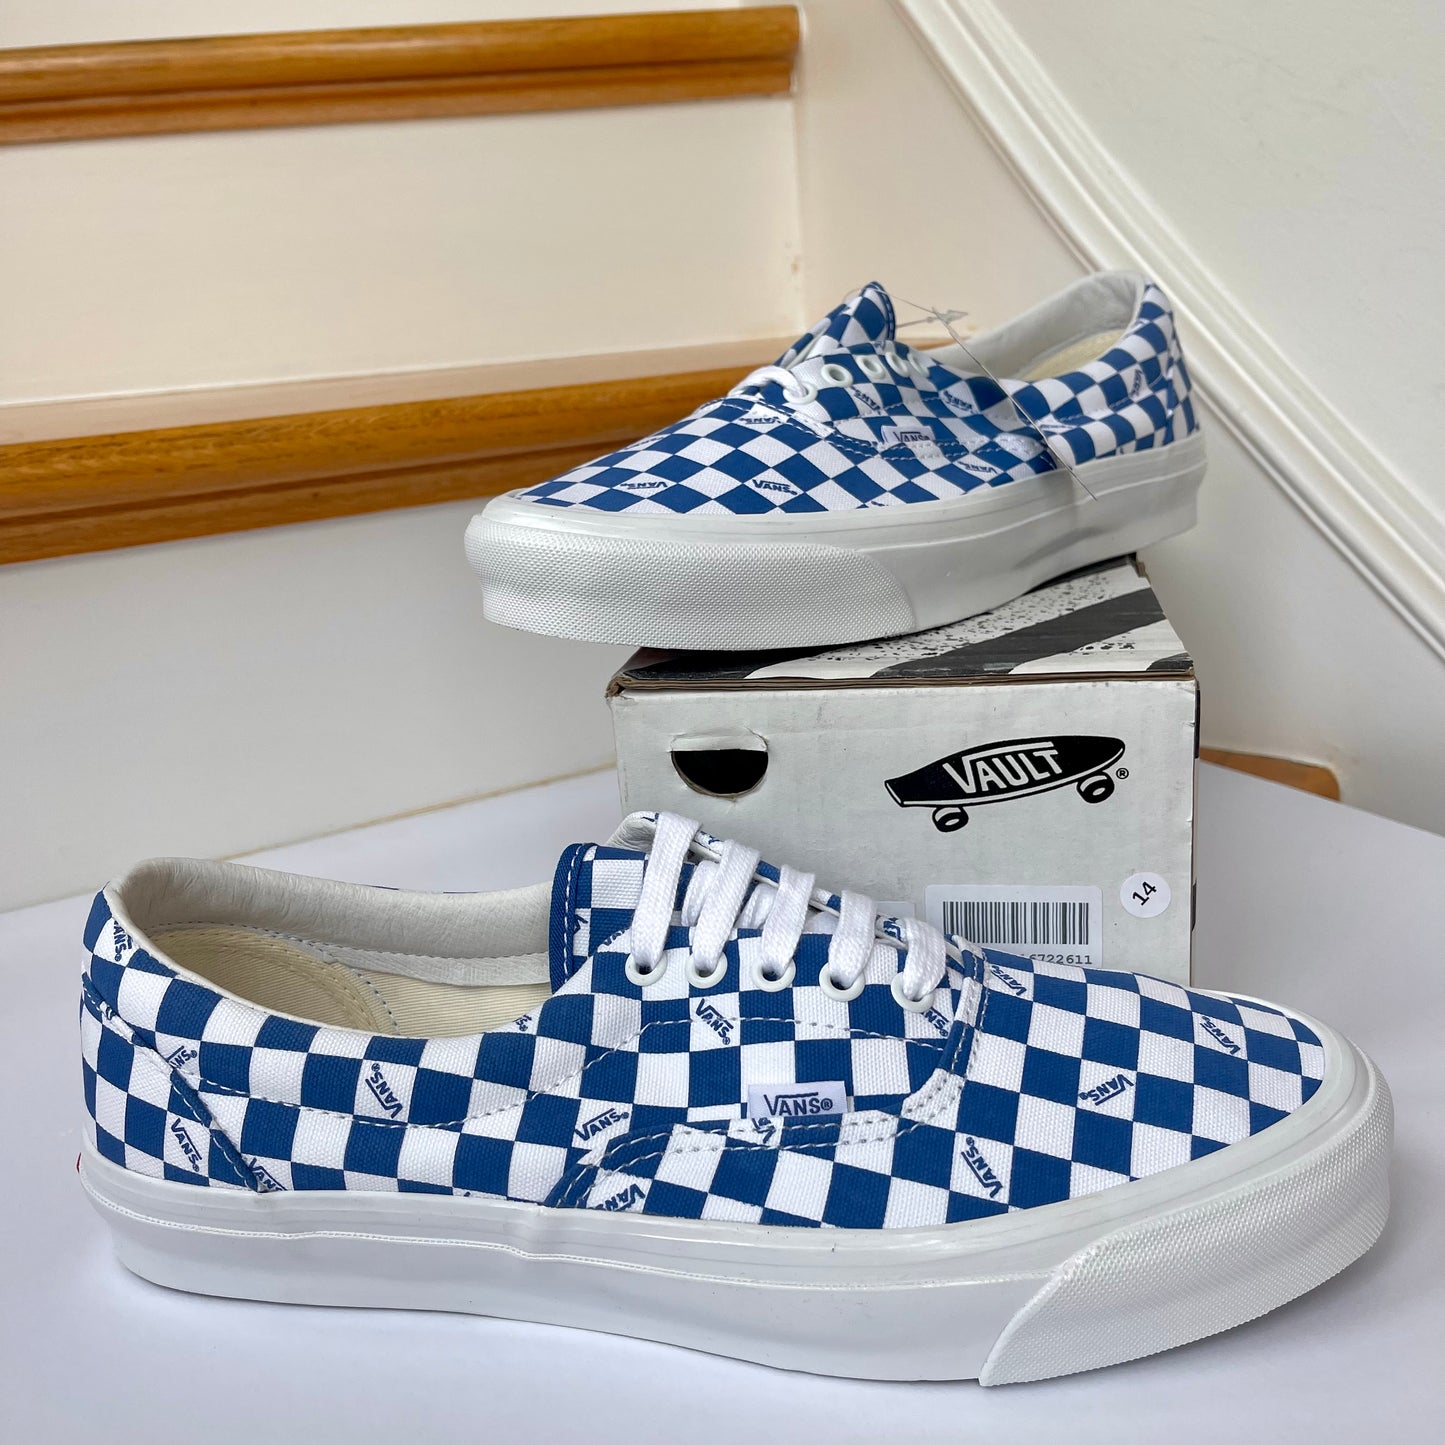 Vans OG Era LX Lace Up Sneakers in blue logo checkerboard classic sneakers